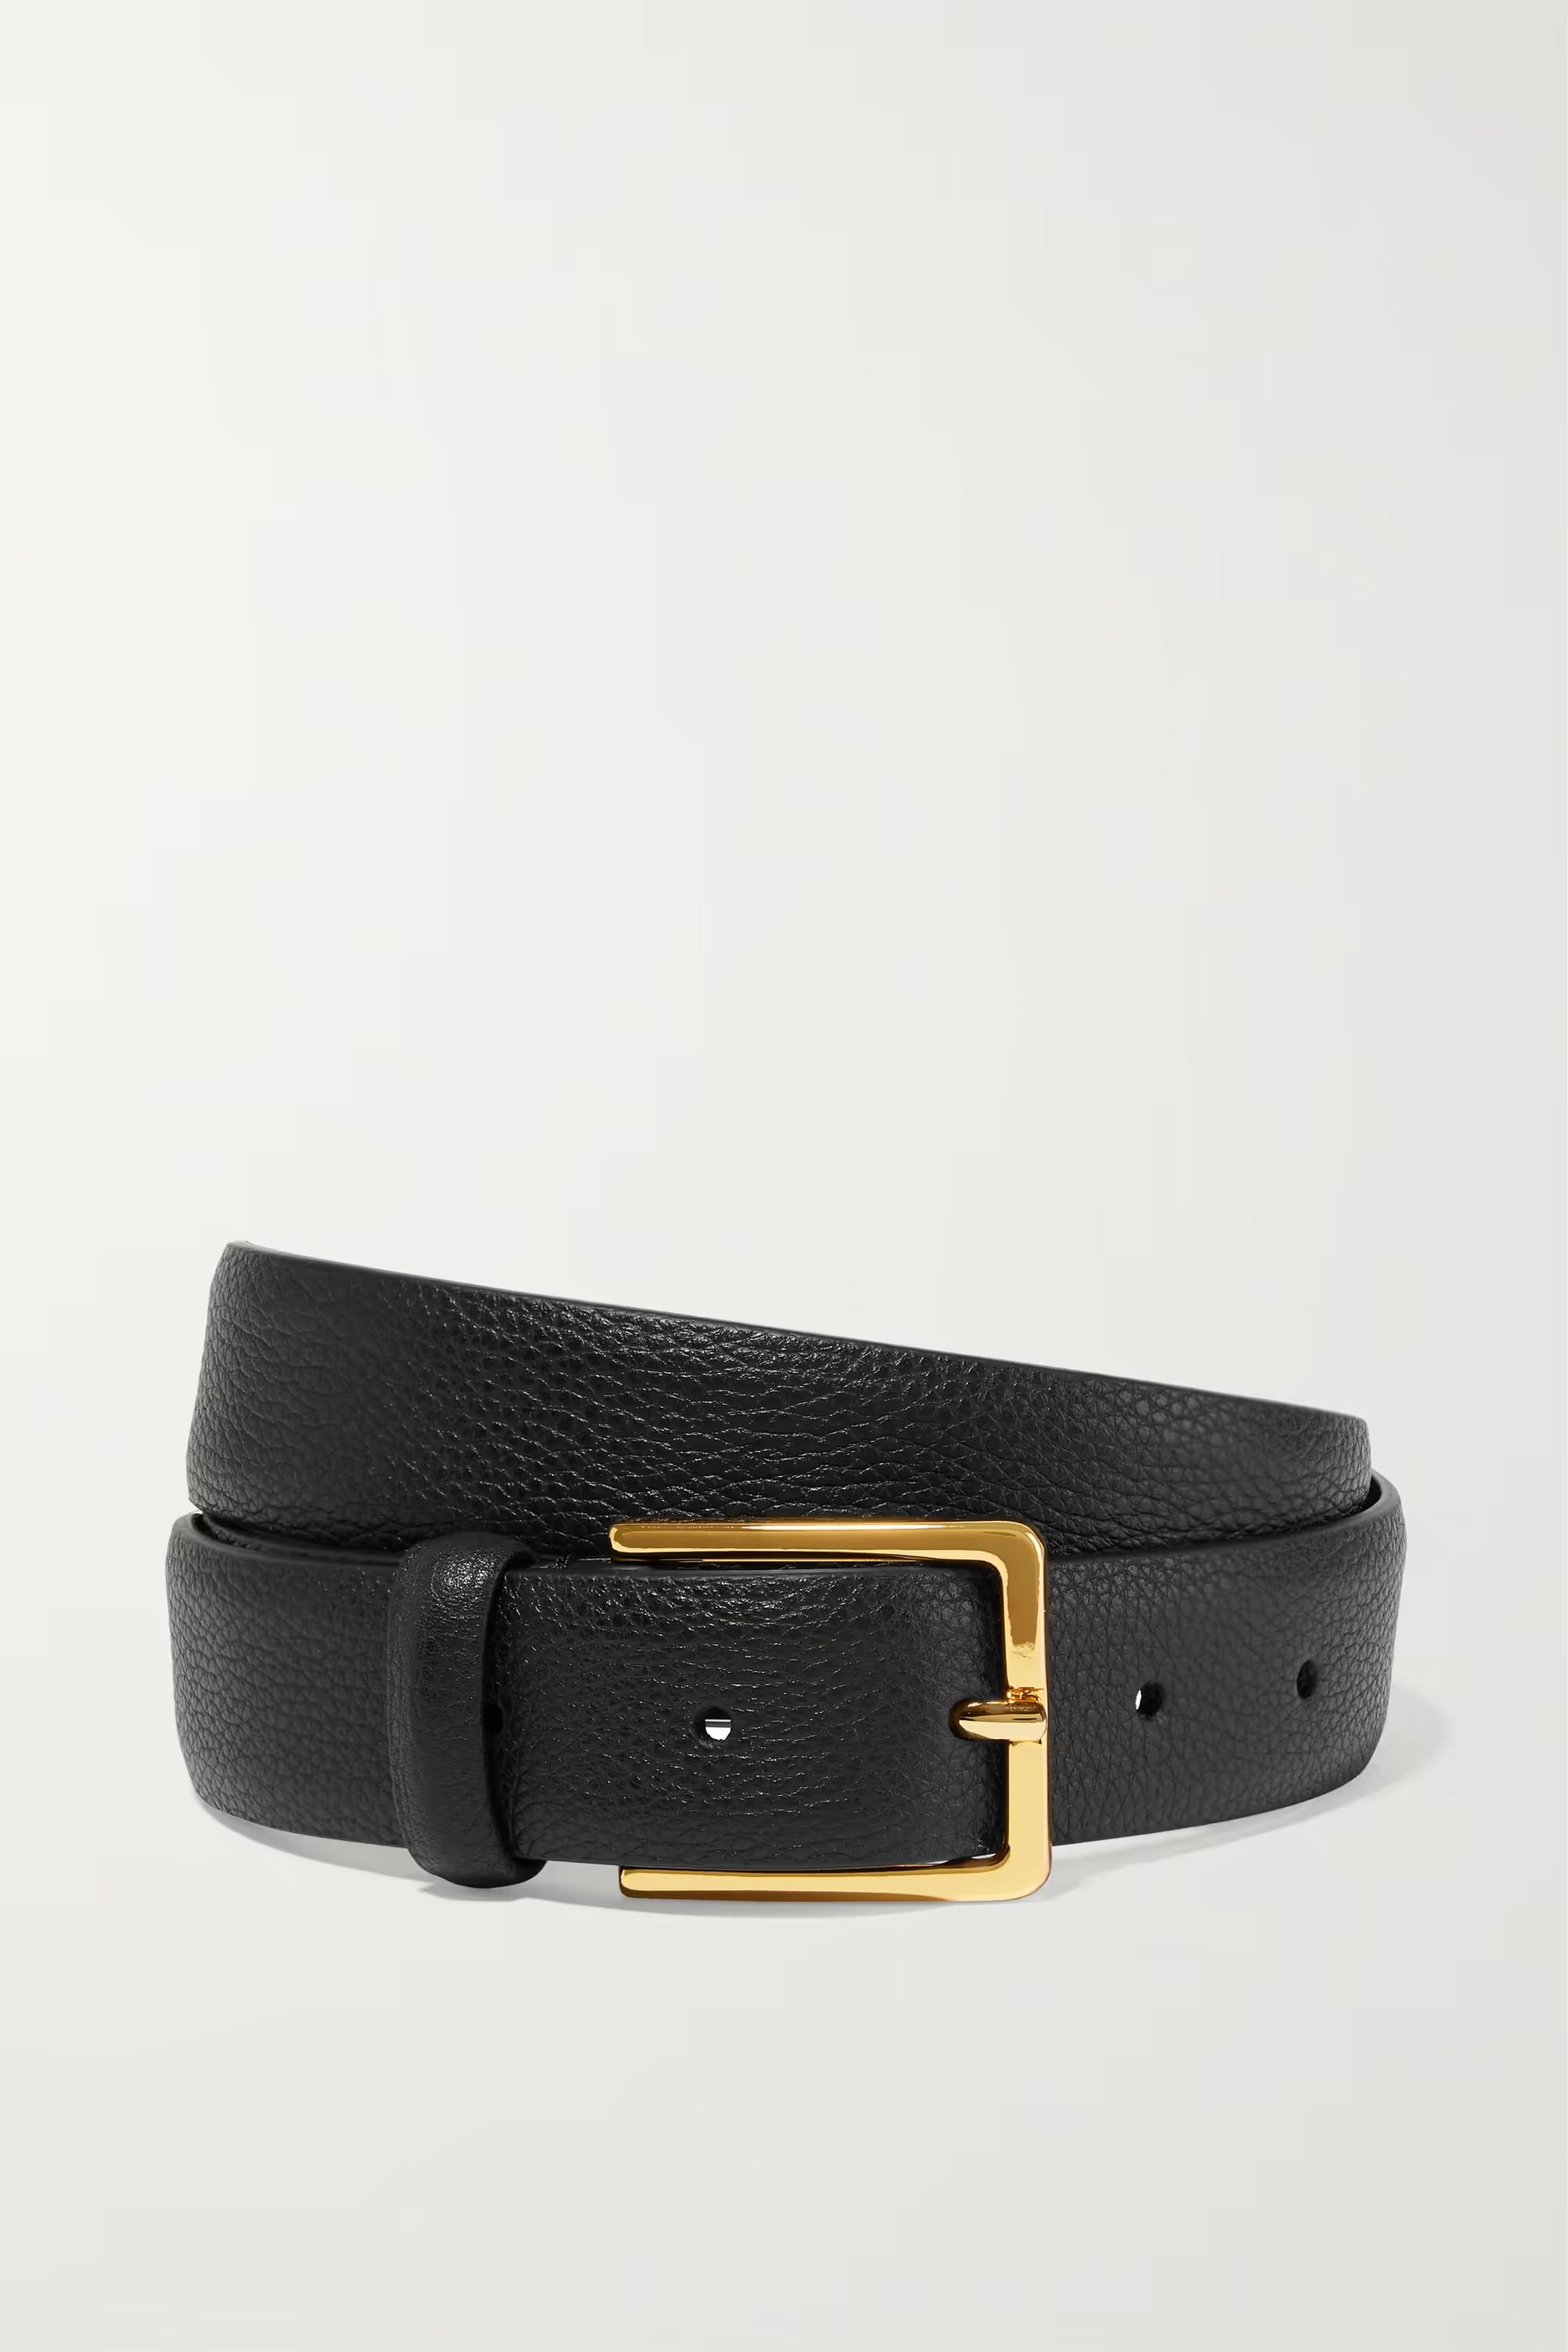 ANDERSON'STextured-leather belt | NET-A-PORTER (US)